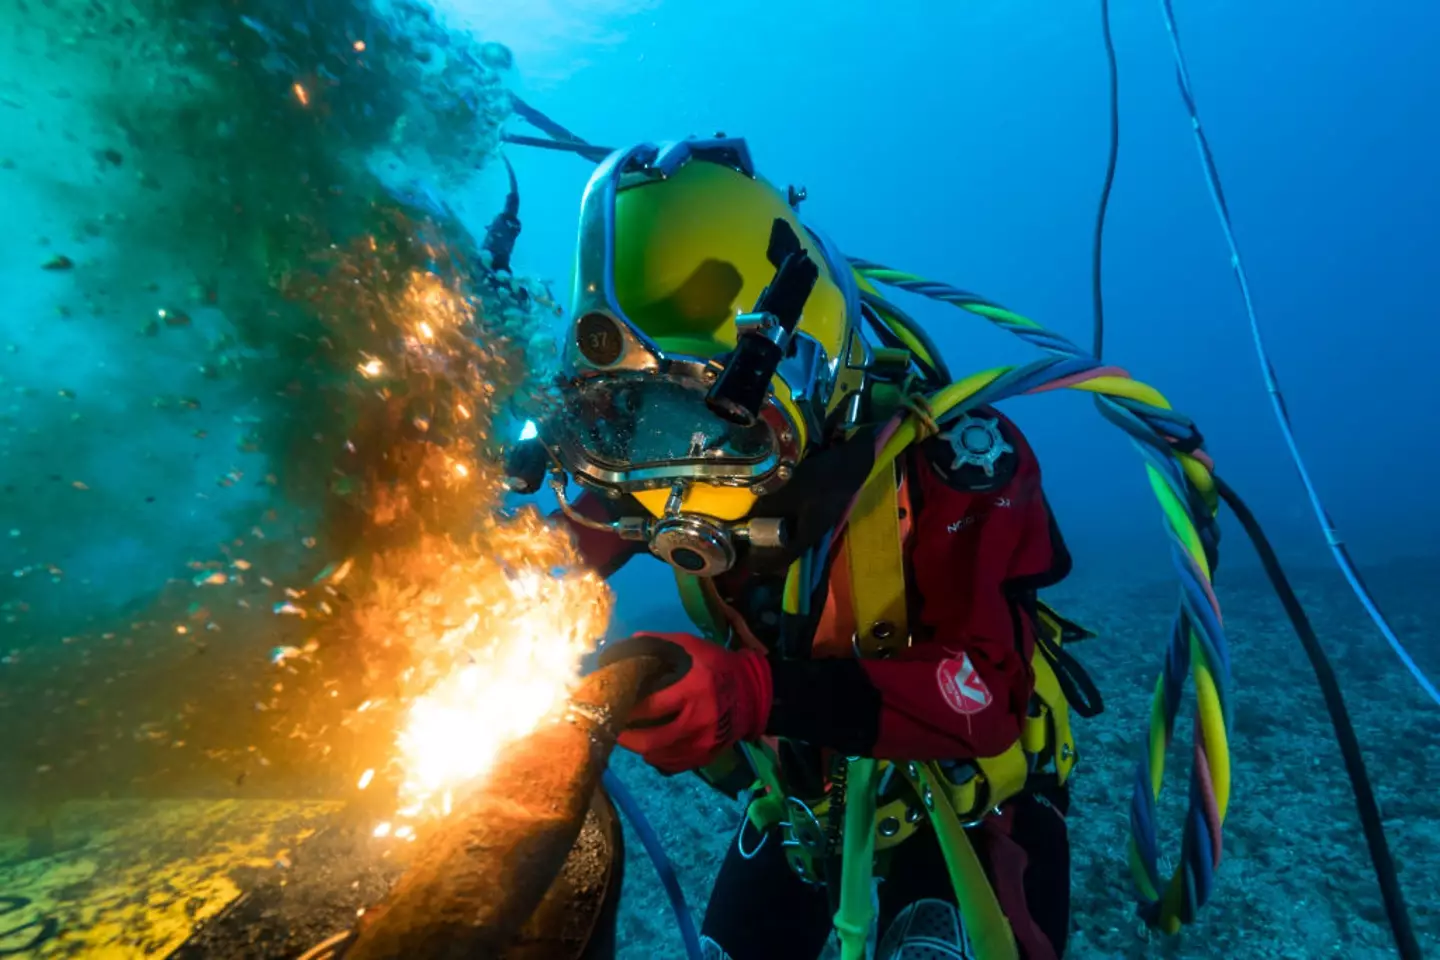 Working with heavy machinery underwater is incredibly risky.